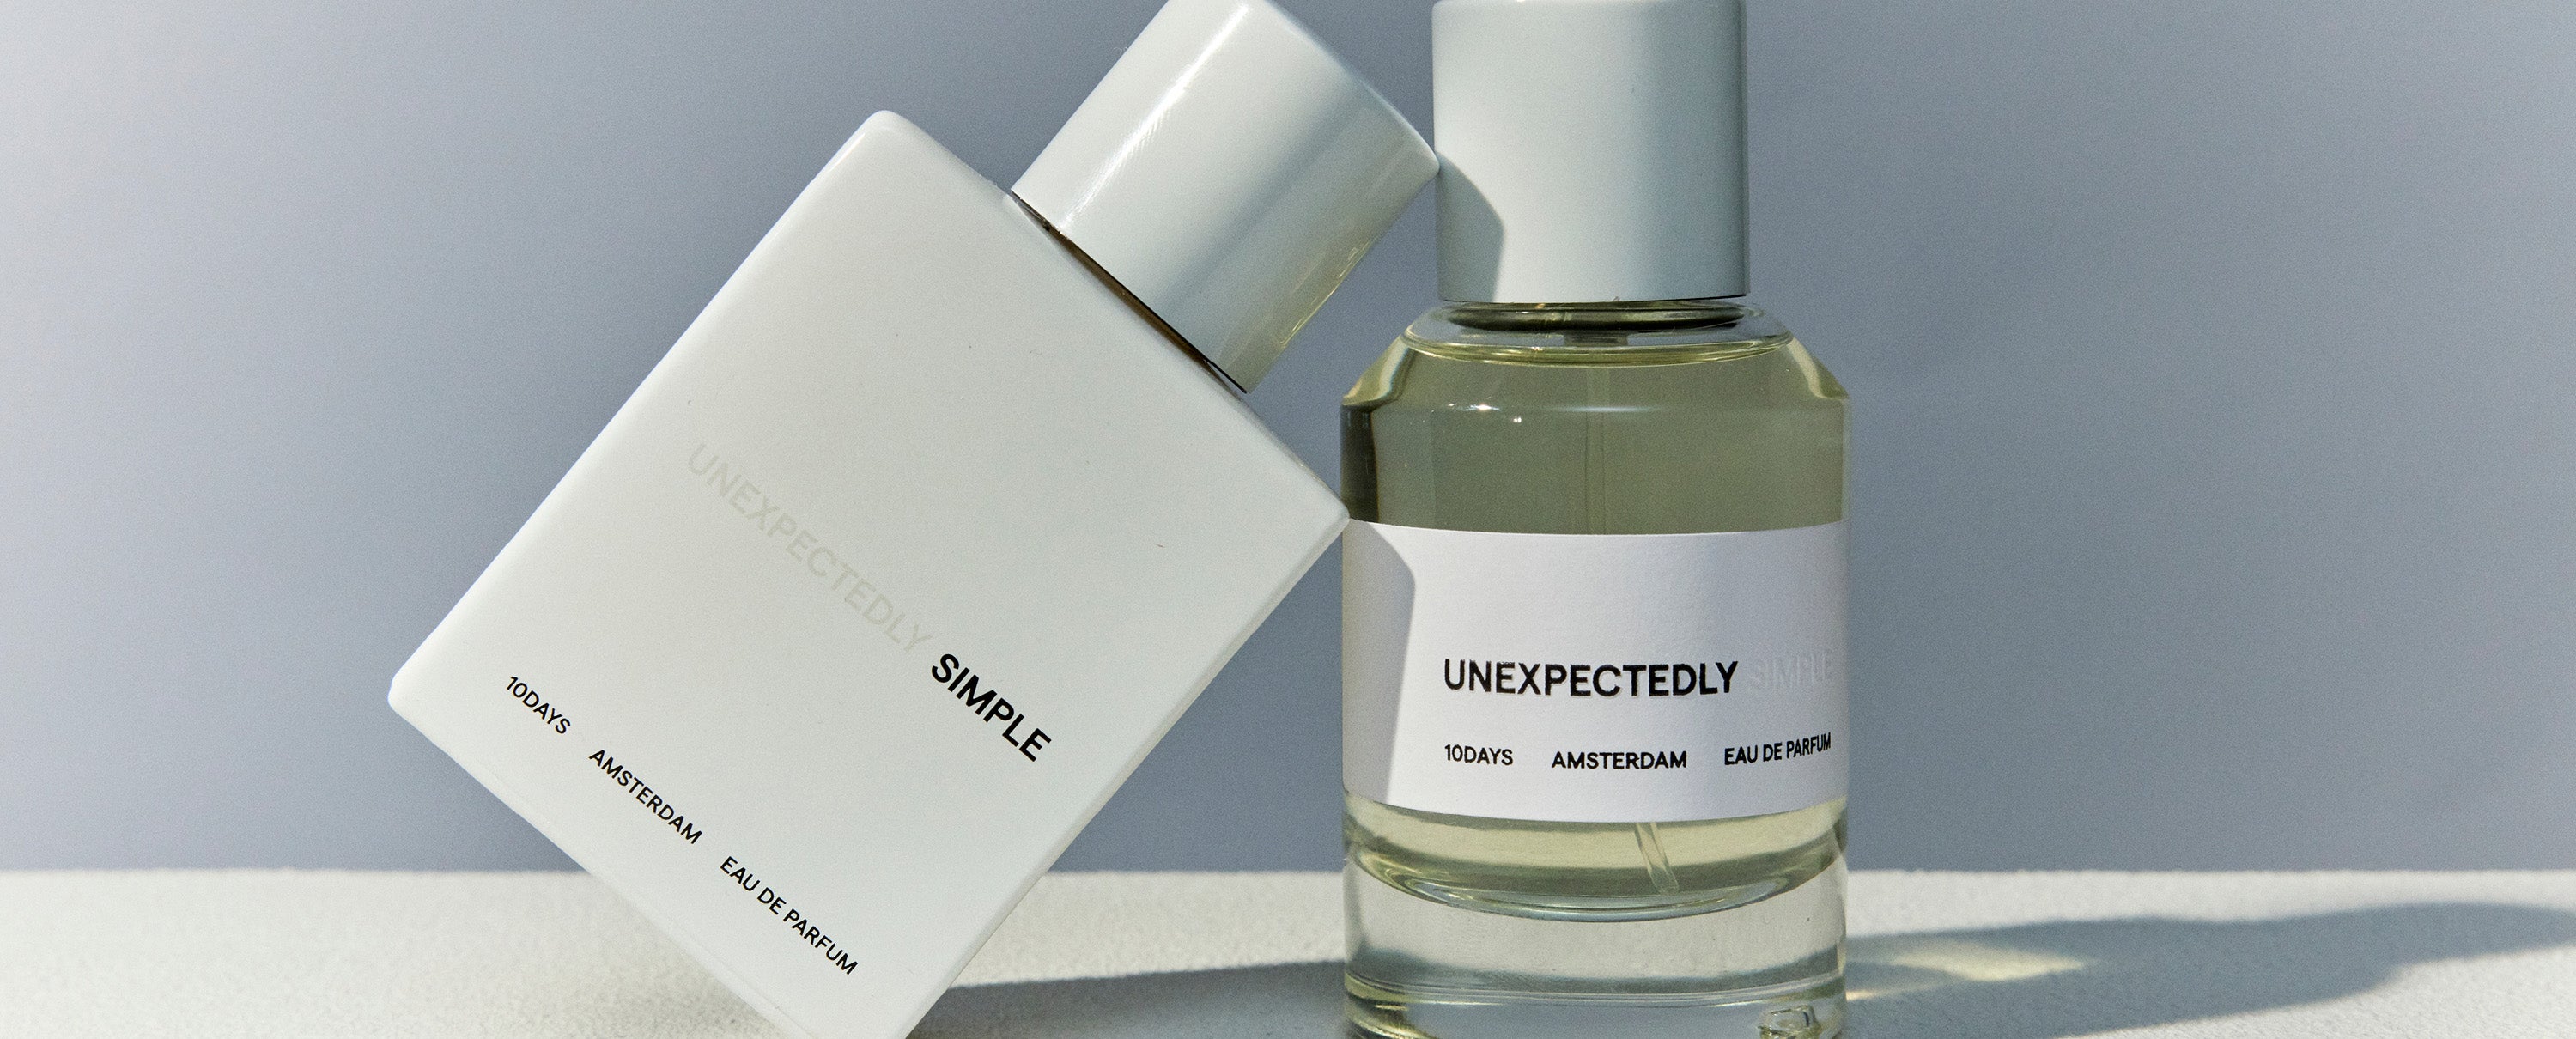 10DAYS parfums: 'Unexpectedly' & 'Simple'